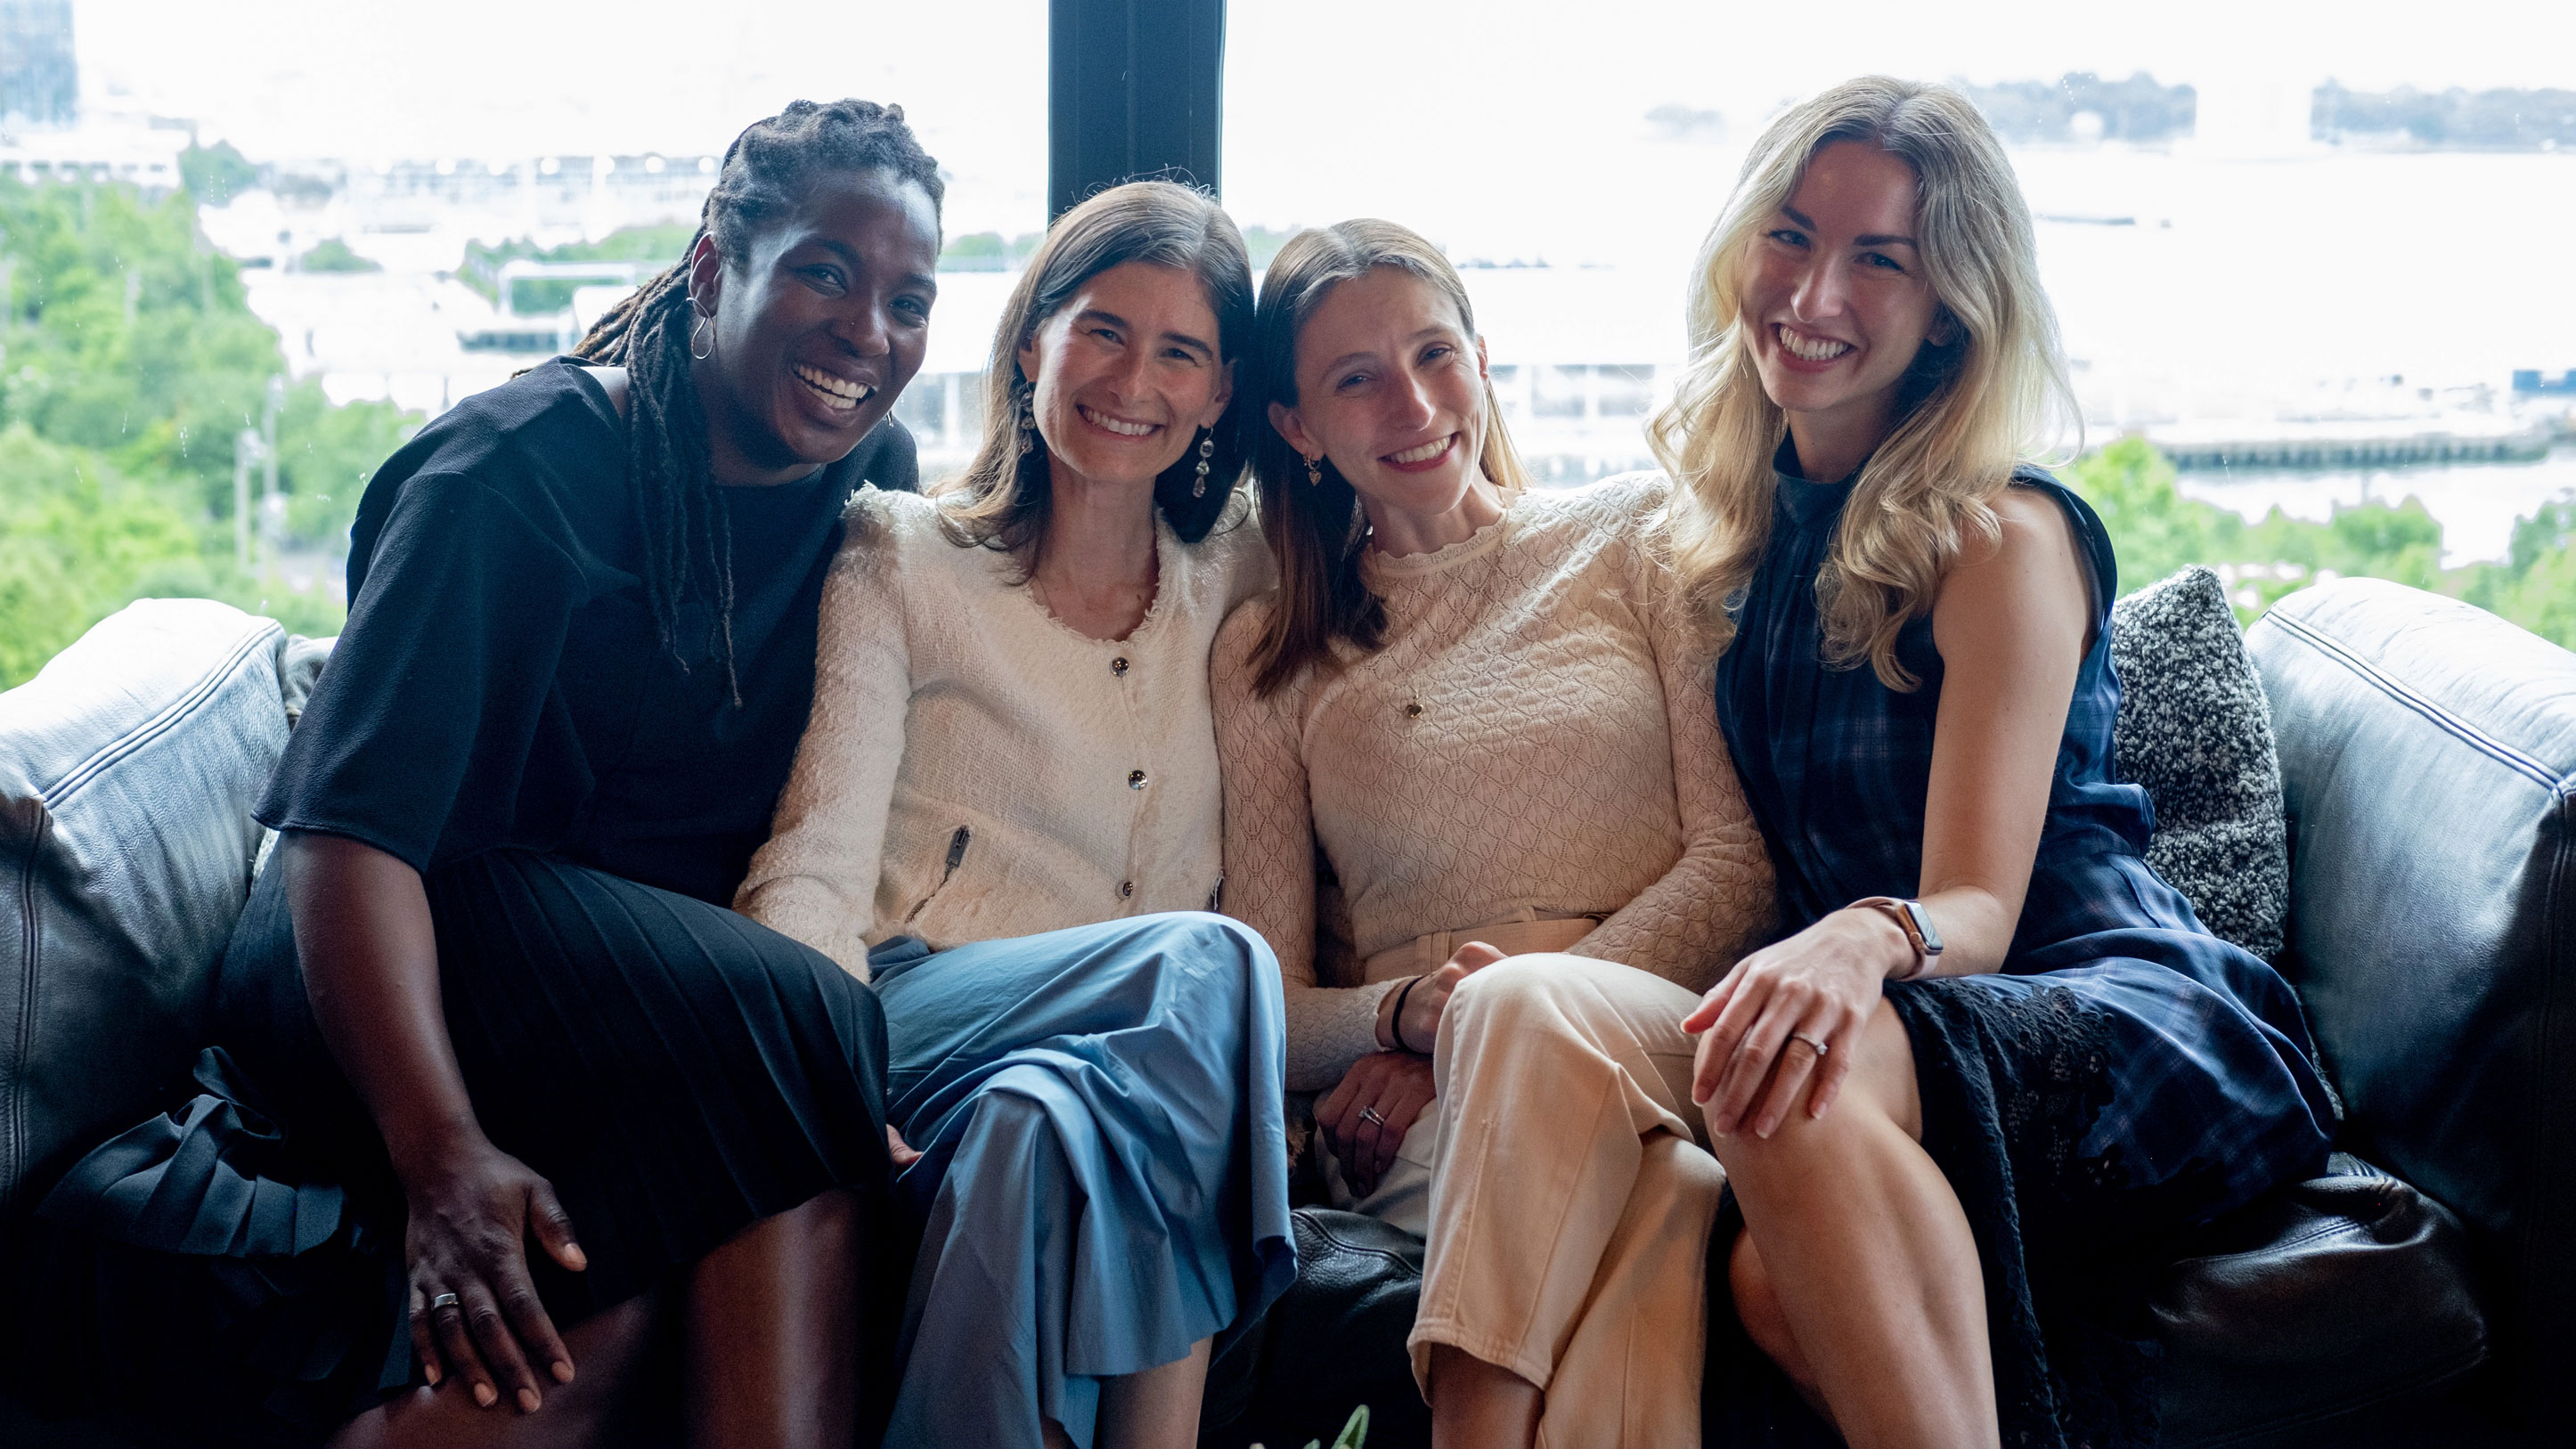 Coalition investors (left to right): Cityblock Health co-founder Toyin Ajayi, Tribe AI co-founder Jackie Nelson, Umbrella co-founder Lindsay Ullman, Glossier Communications Director Ashley Mayer